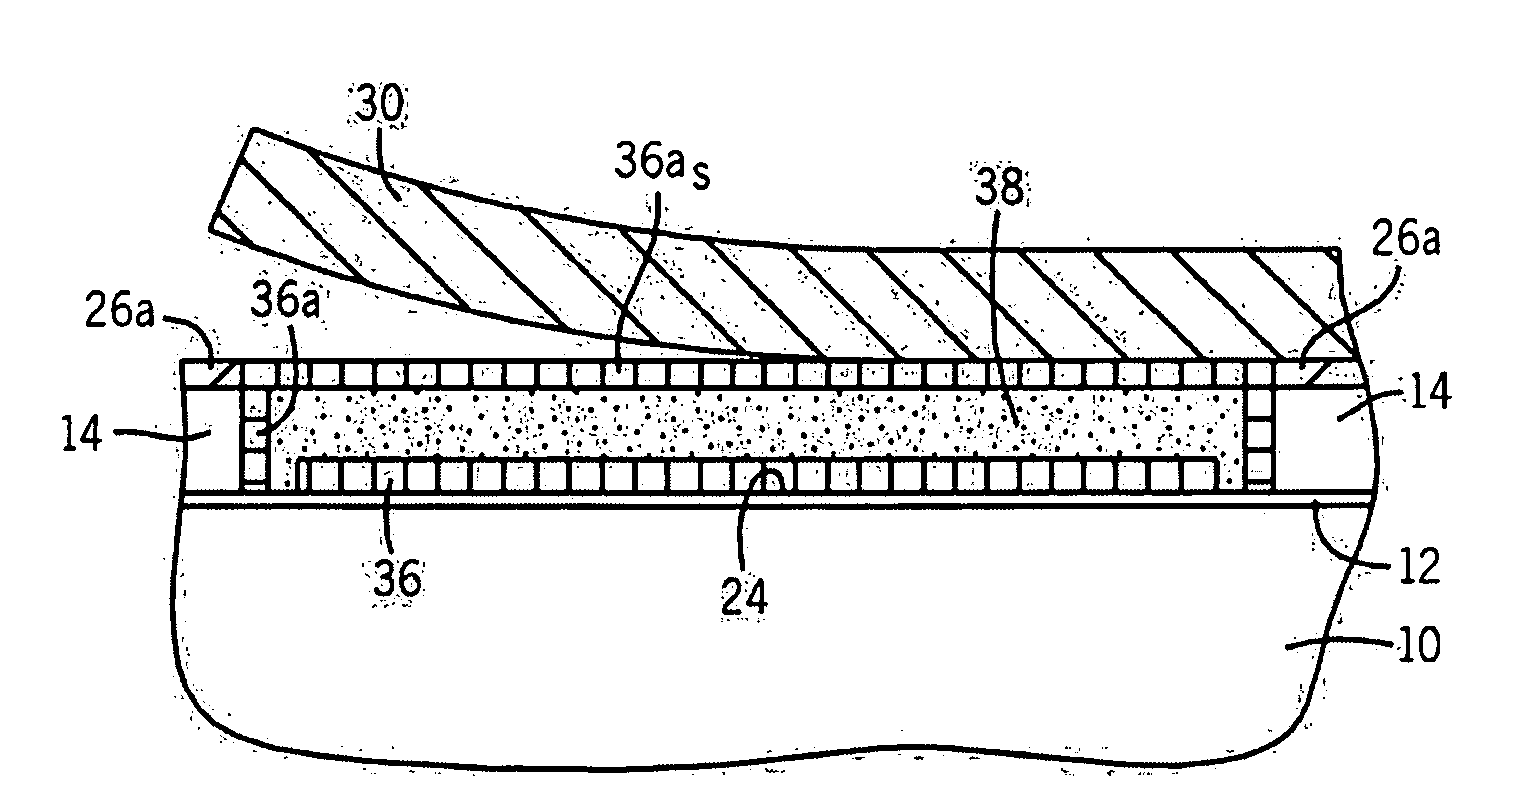 Graphoepitaxial Self-Assembly of Arrays of Downward Facing Half-Cylinders